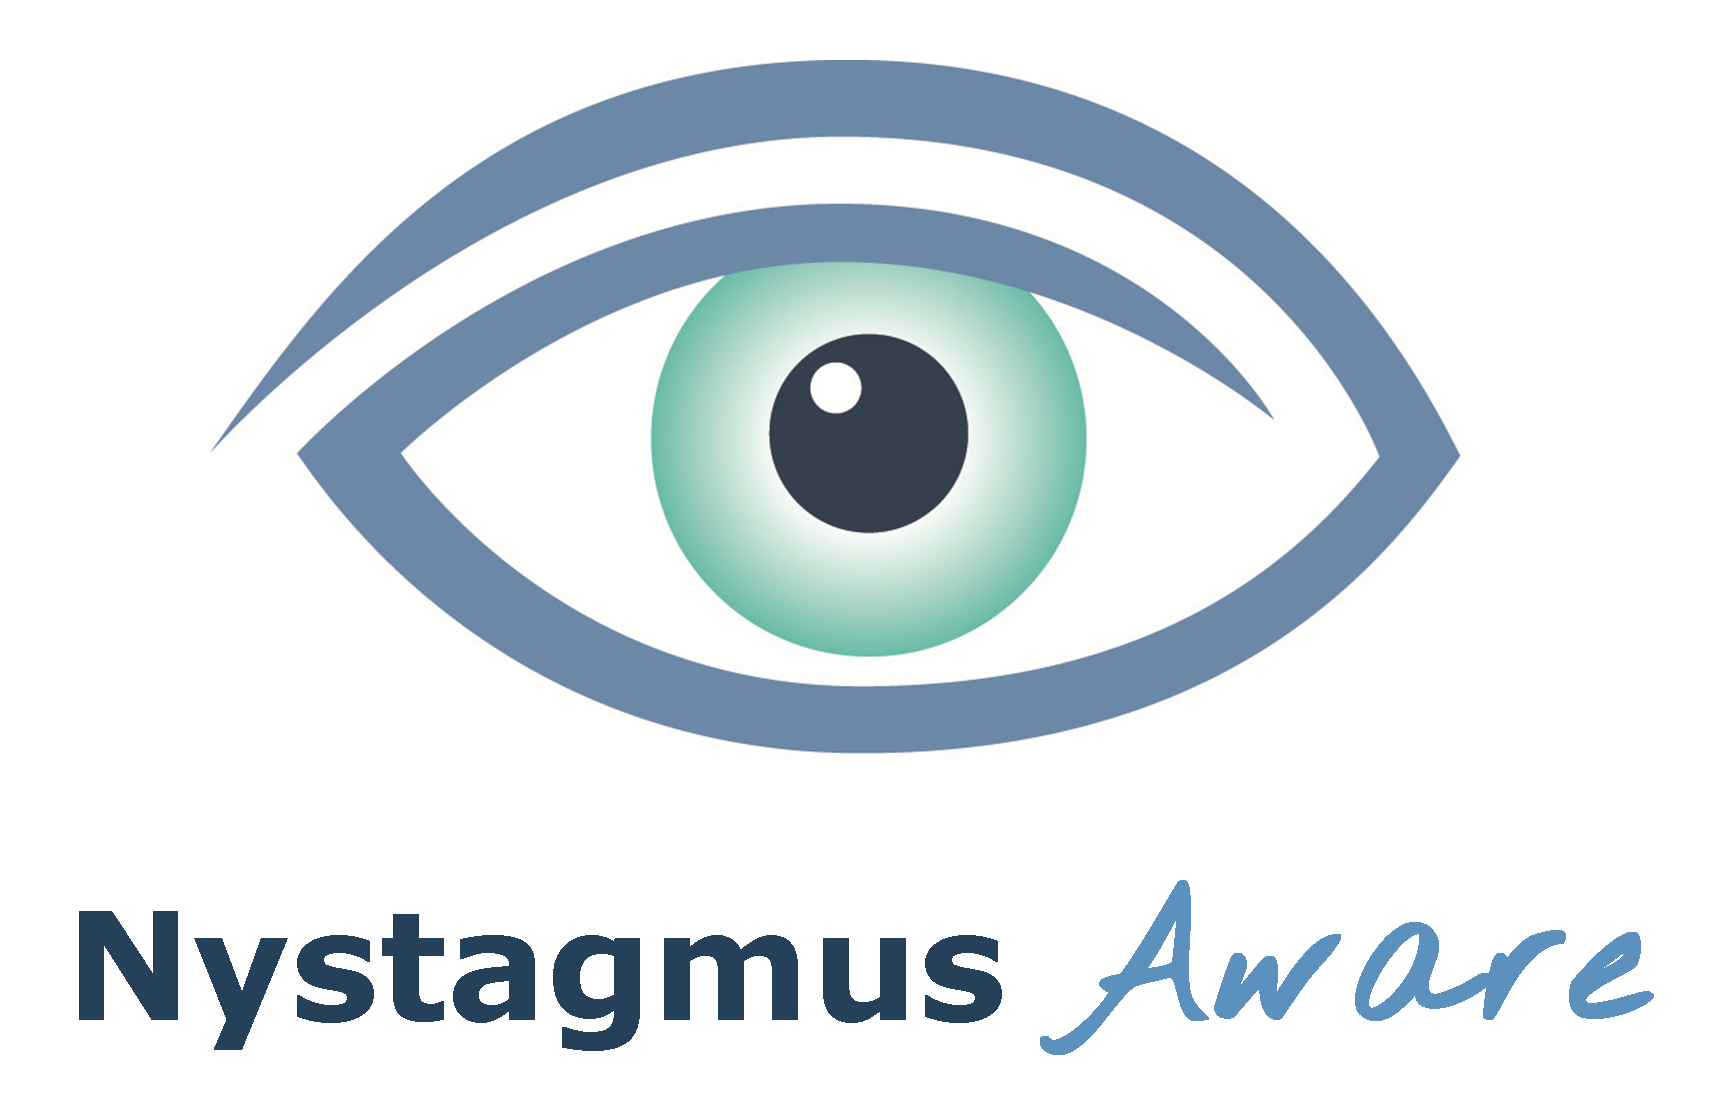 The eye logo of the Nystagmus Network and the words nystagmus aware.